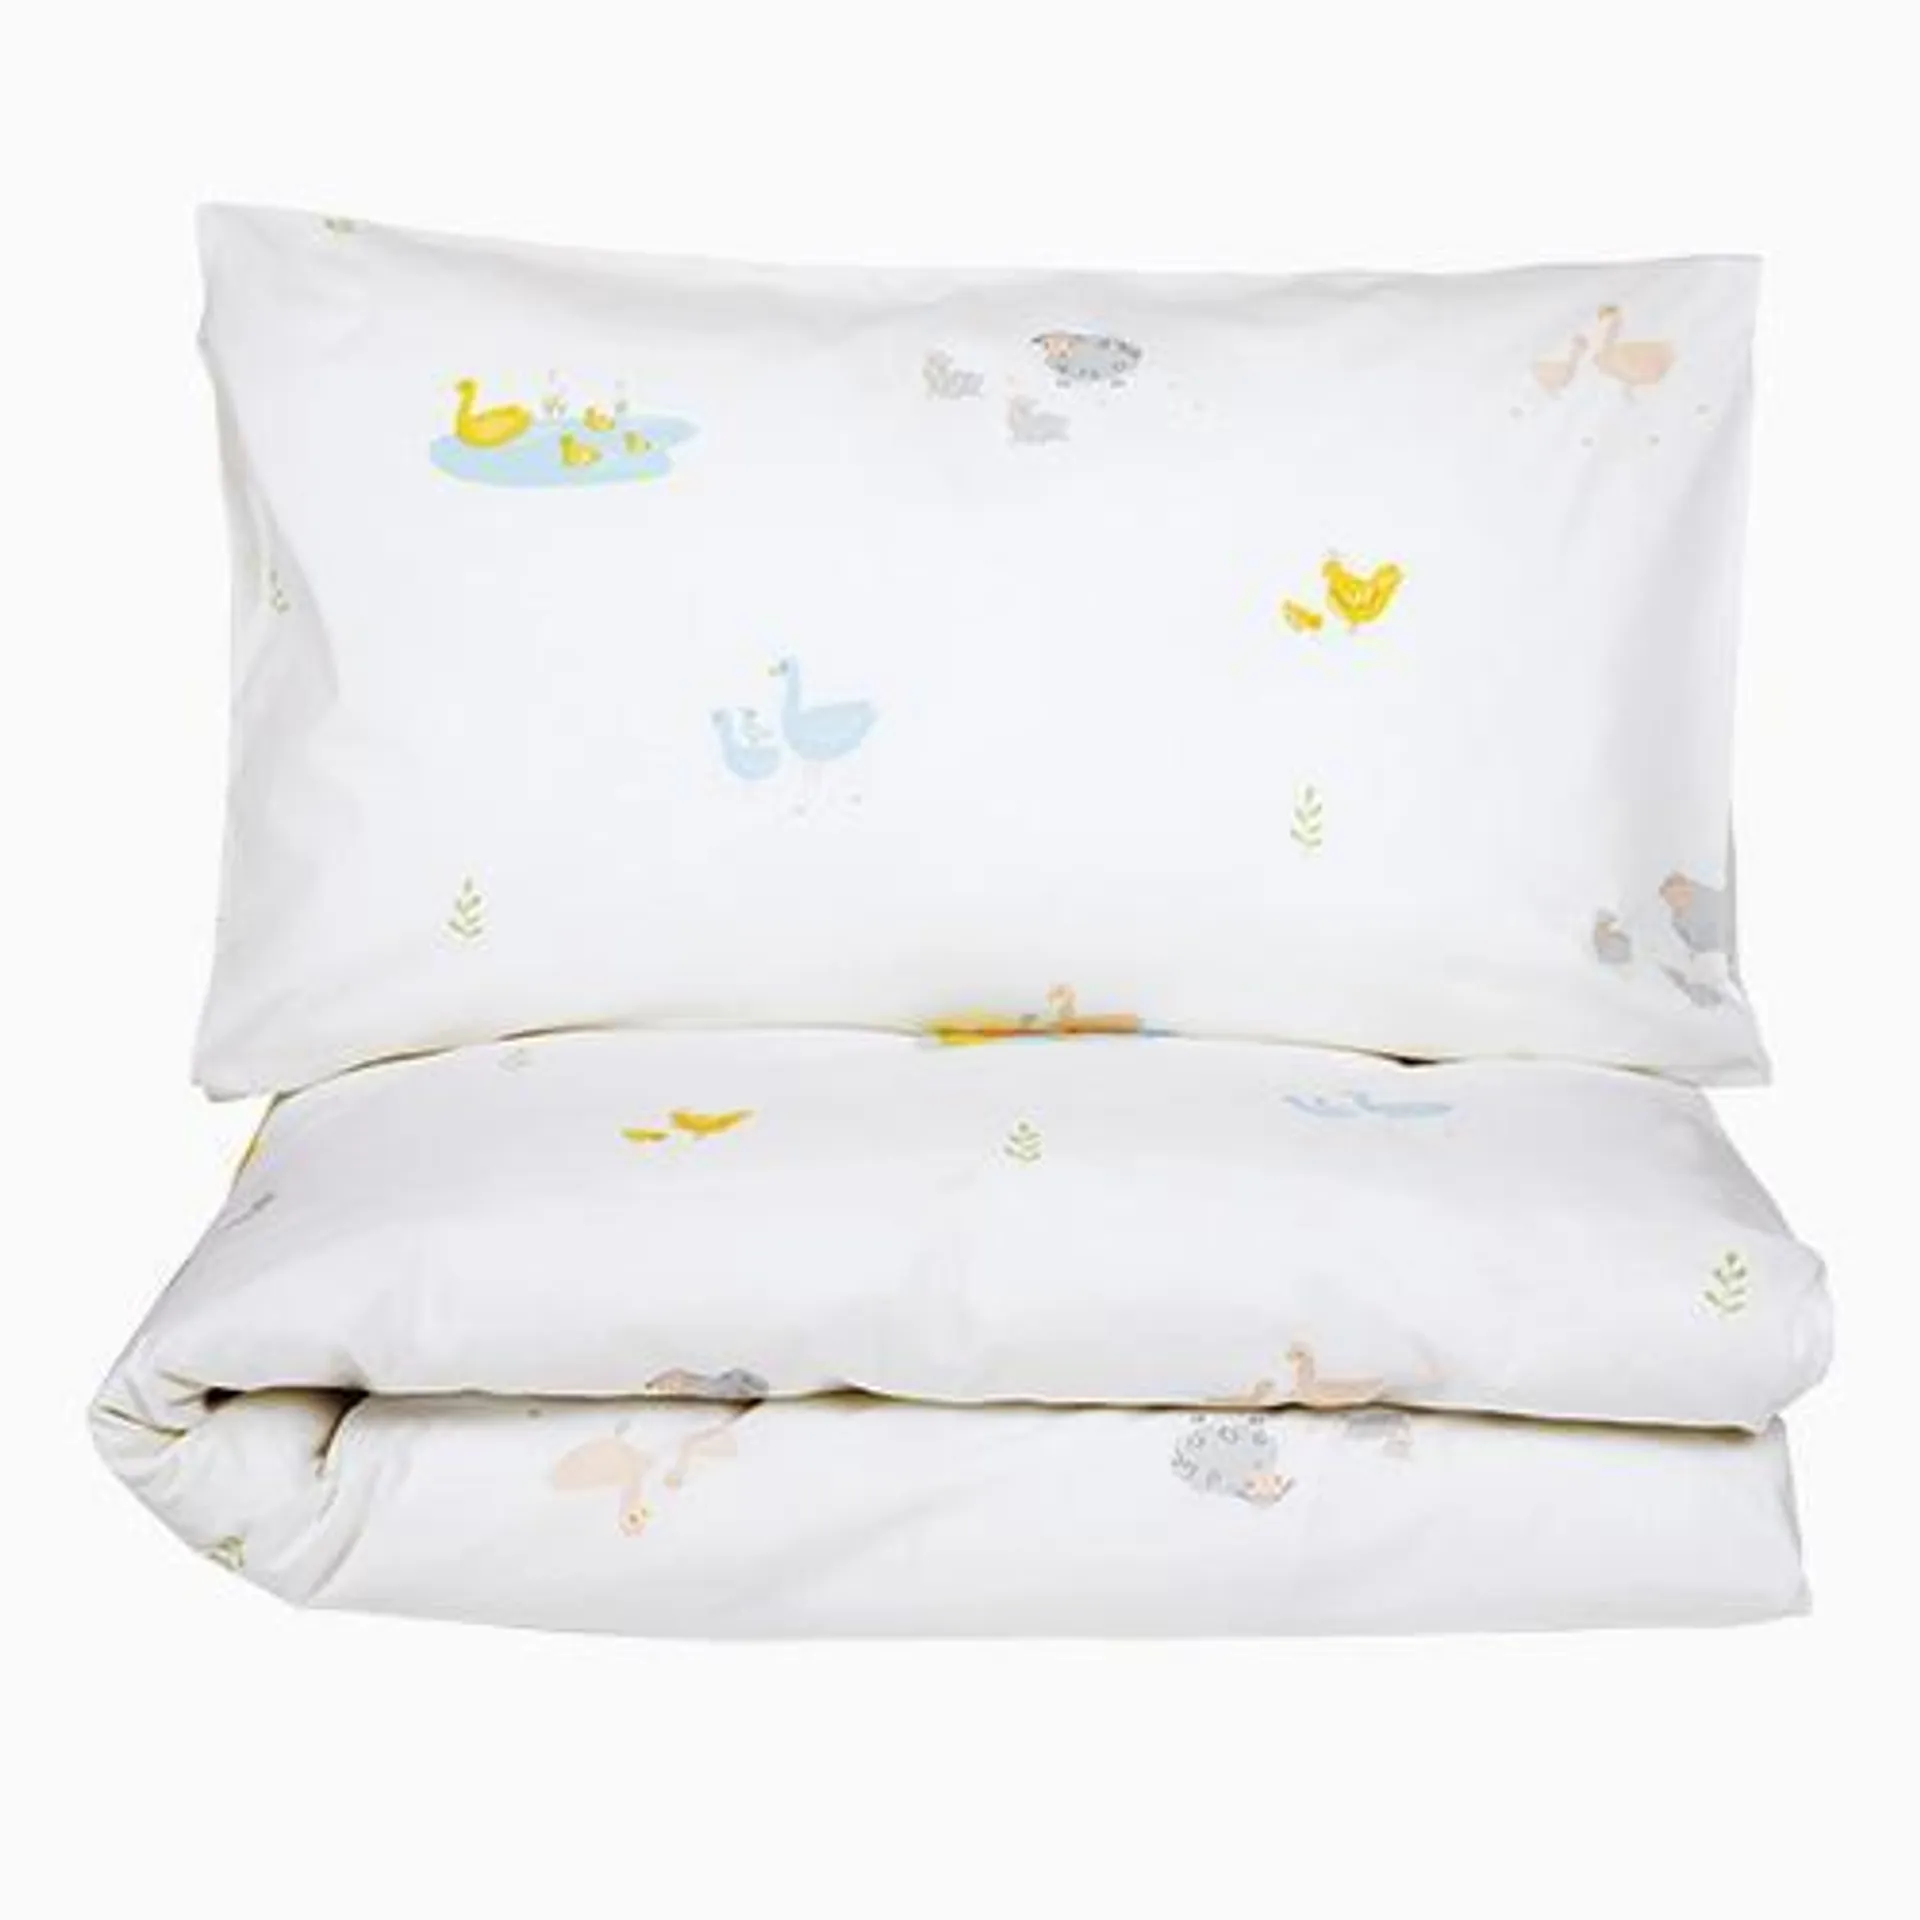 Day at the Farm Bedding Set, Toddler/Cot Bed